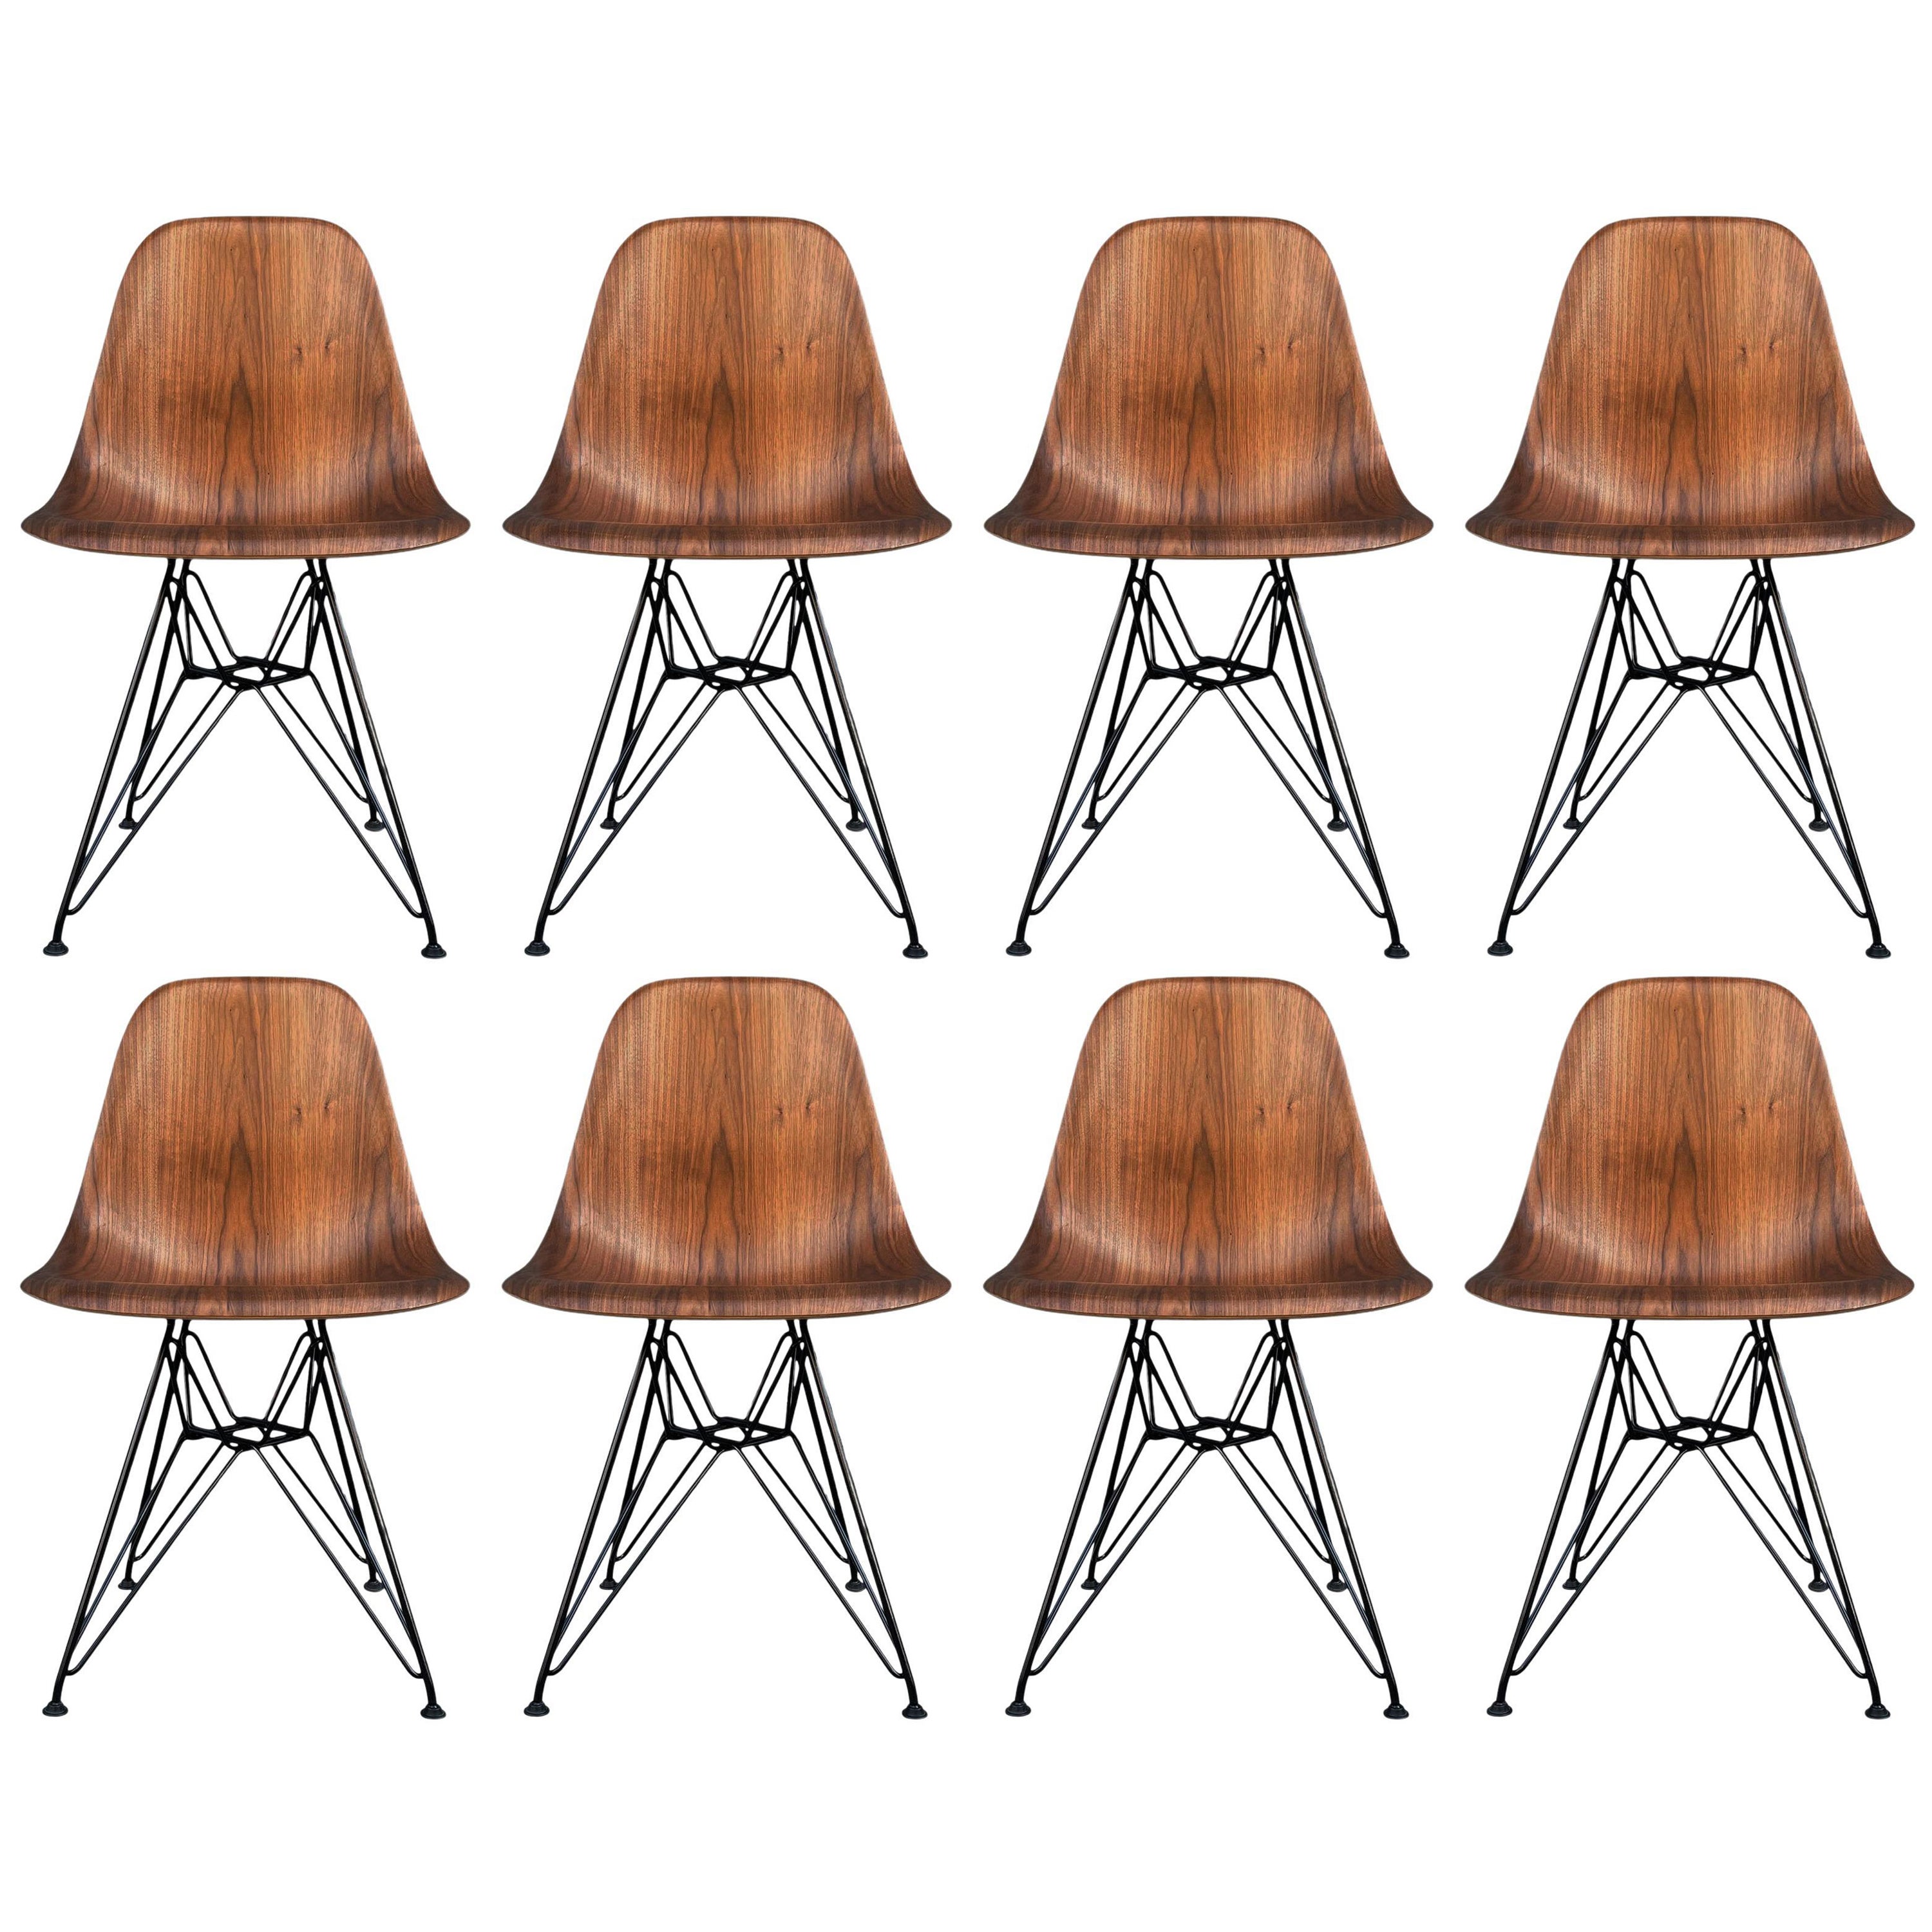 Set of 8 Mid-Century Modern Walnut Wood Shell Dining Chairs by Charles Eames